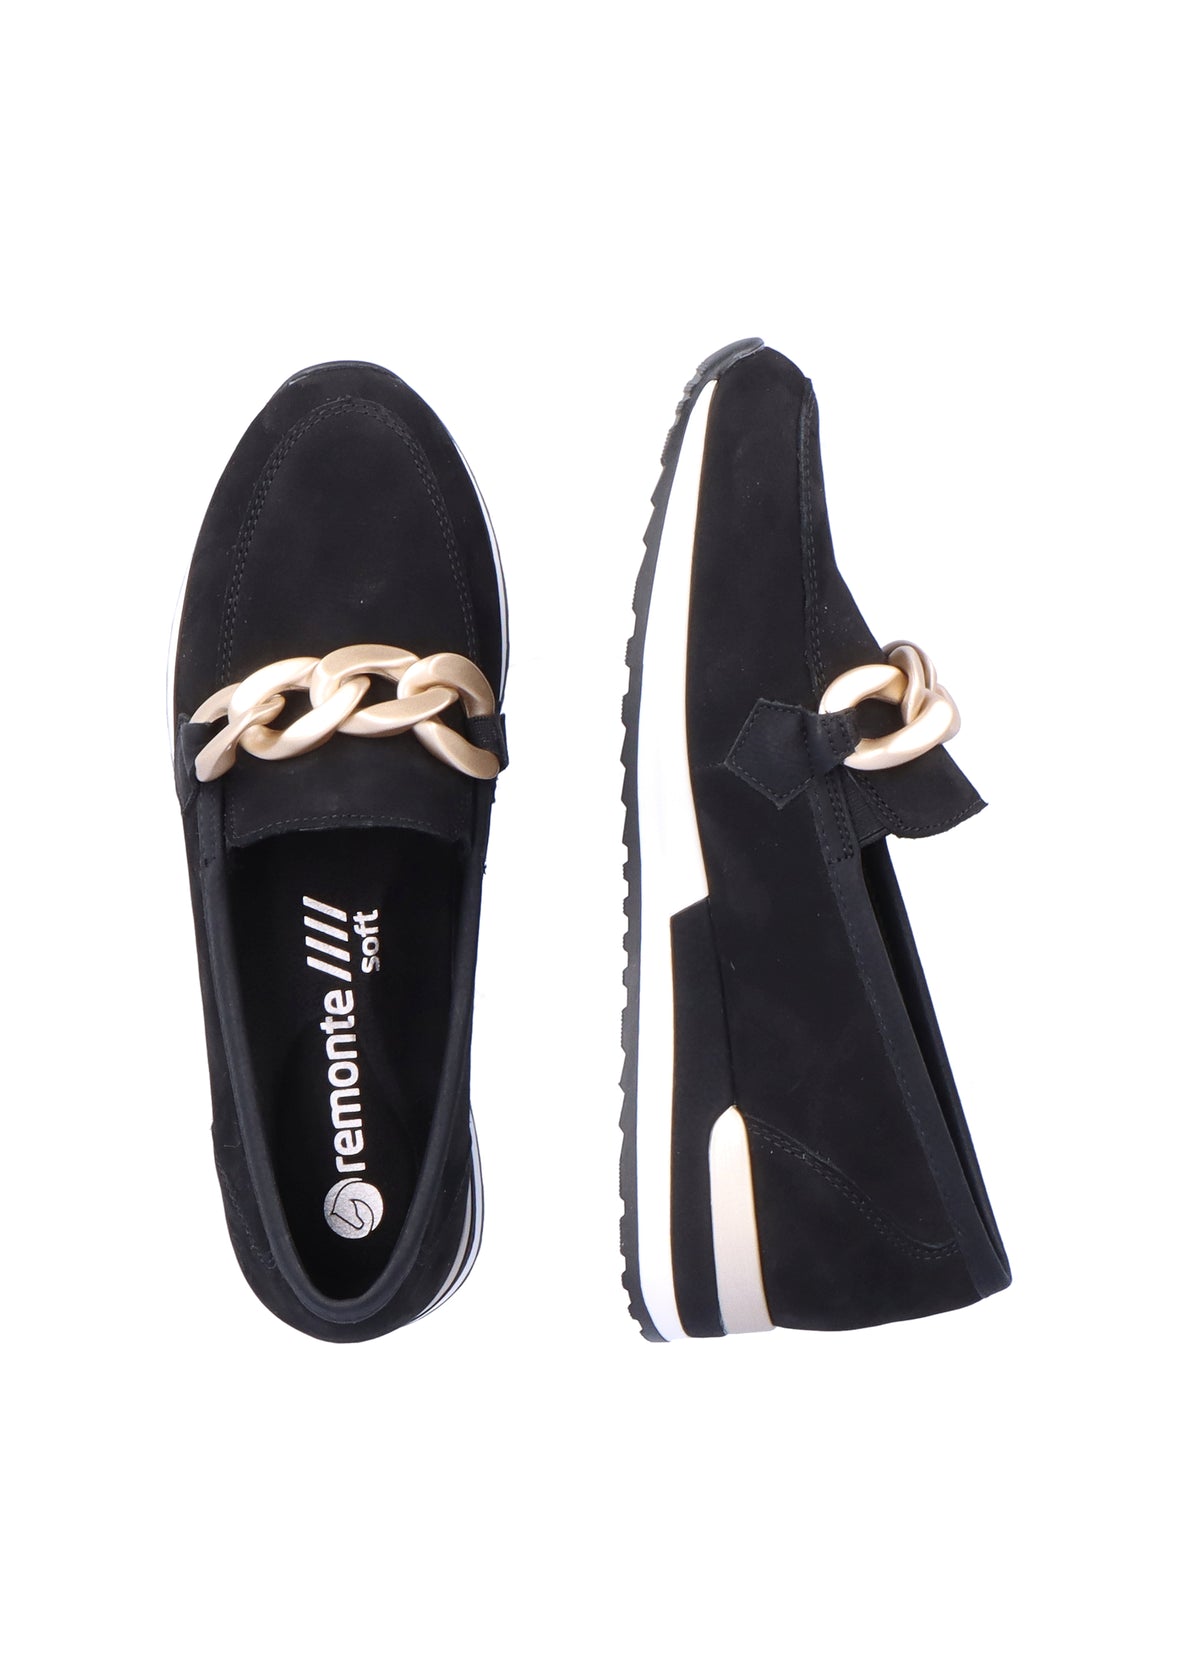 Loafers with a wedge sole - black, gold buckle decoration